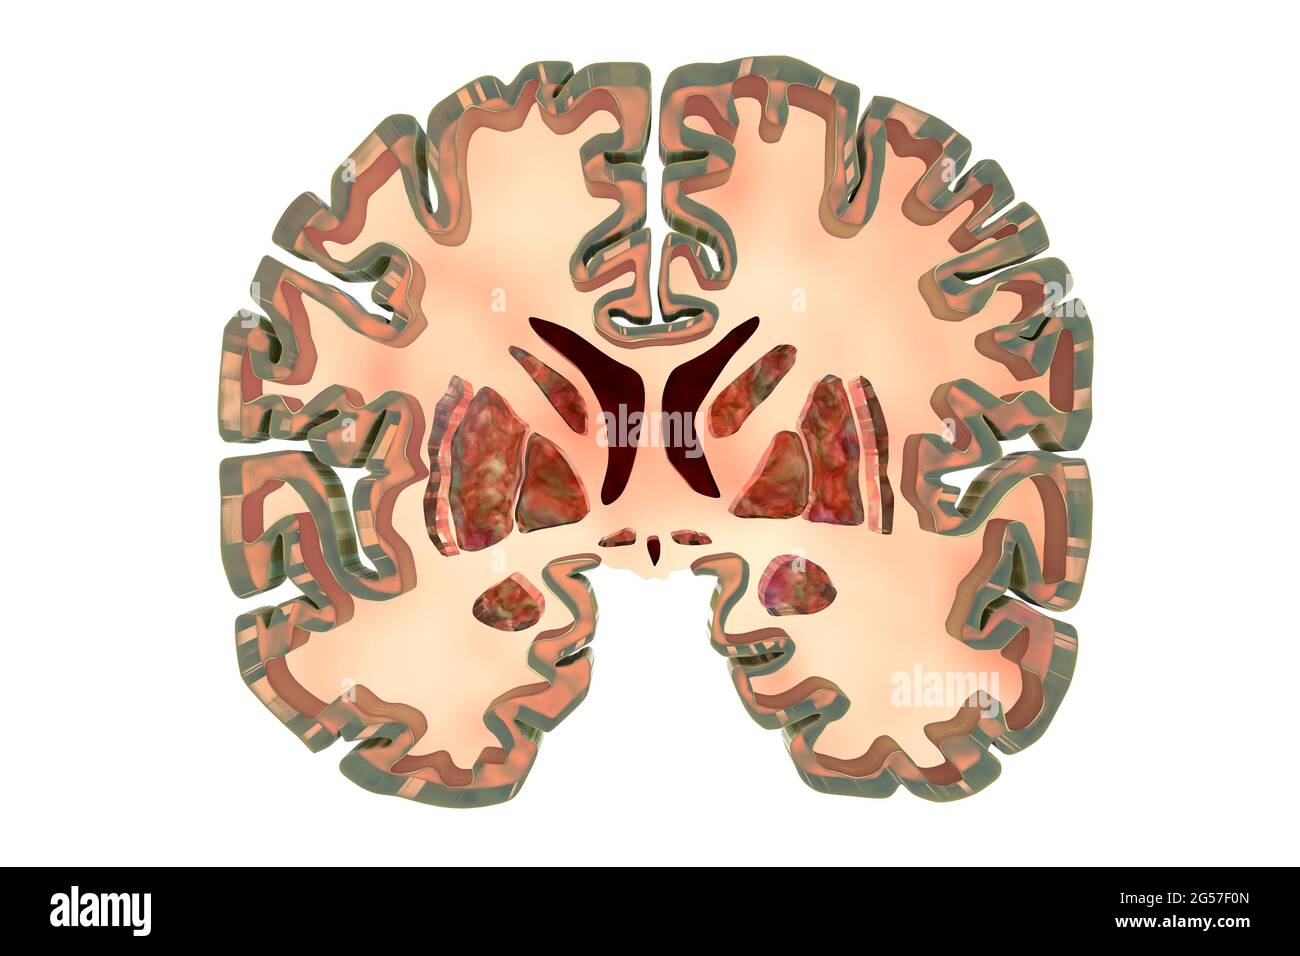 Coronal sections of a healthy brain, illustration Stock Photo